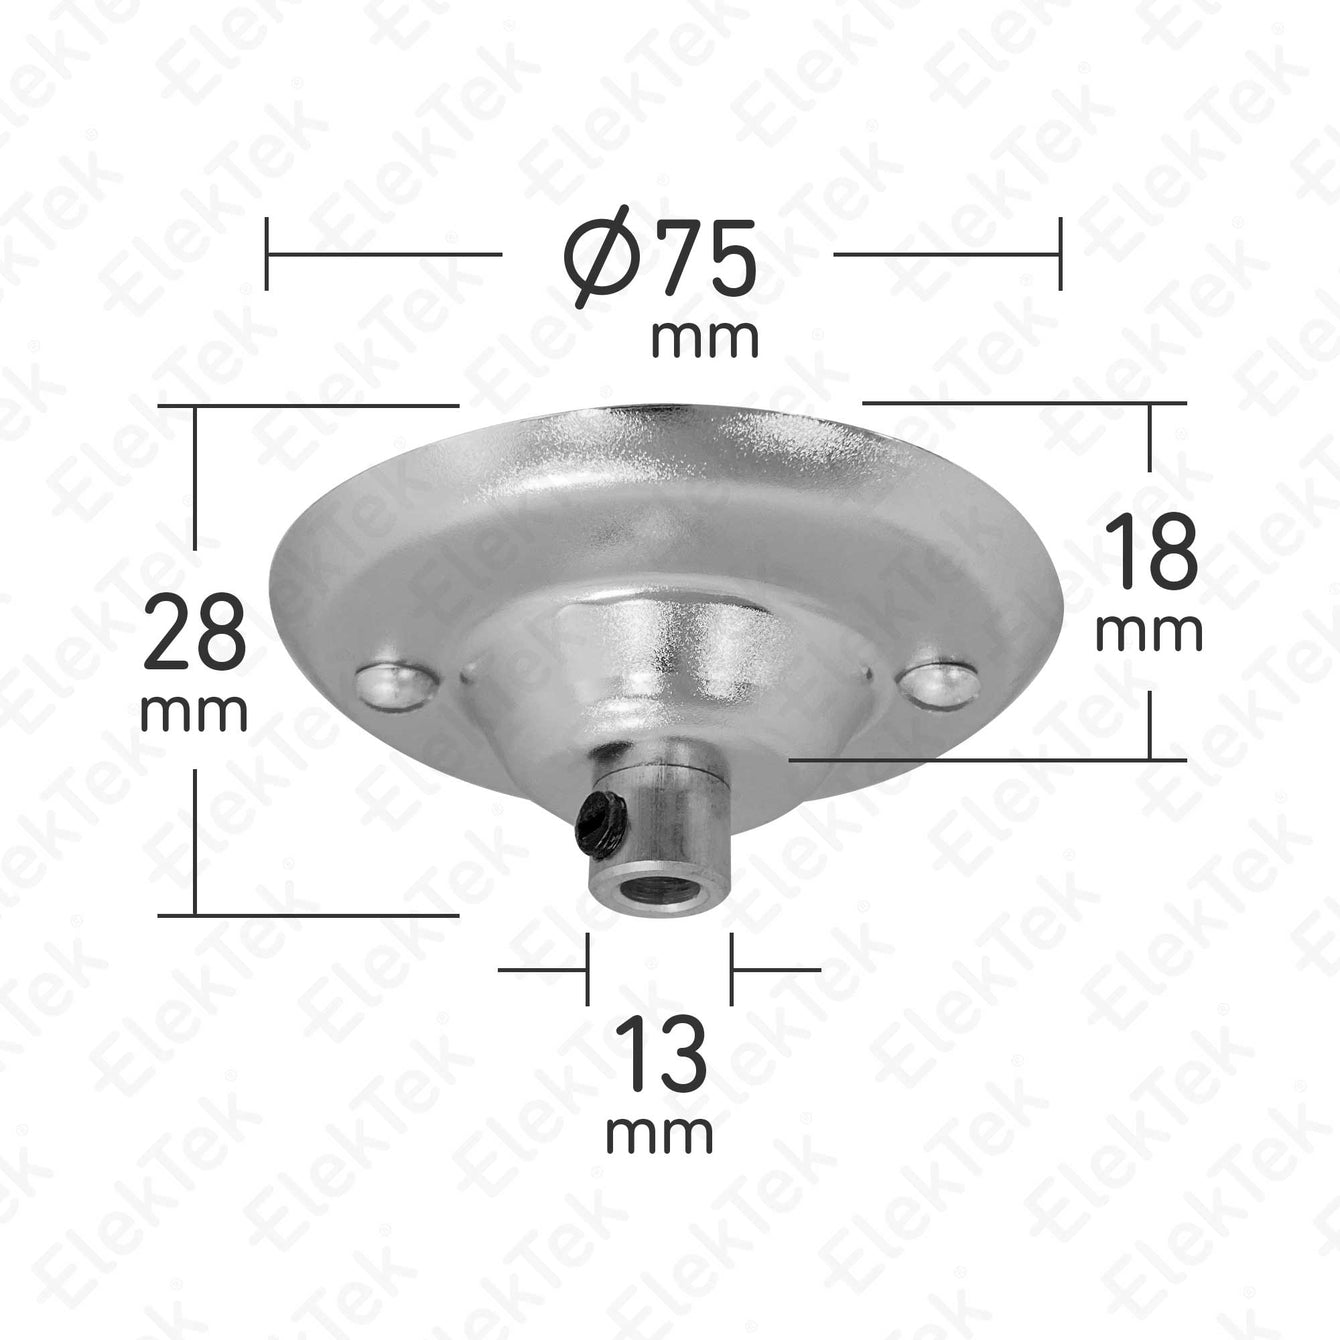 ElekTek 75mm Diameter Ceiling Plate with Cord Grip Metallic Finishes Powder Coated Colours Nickel